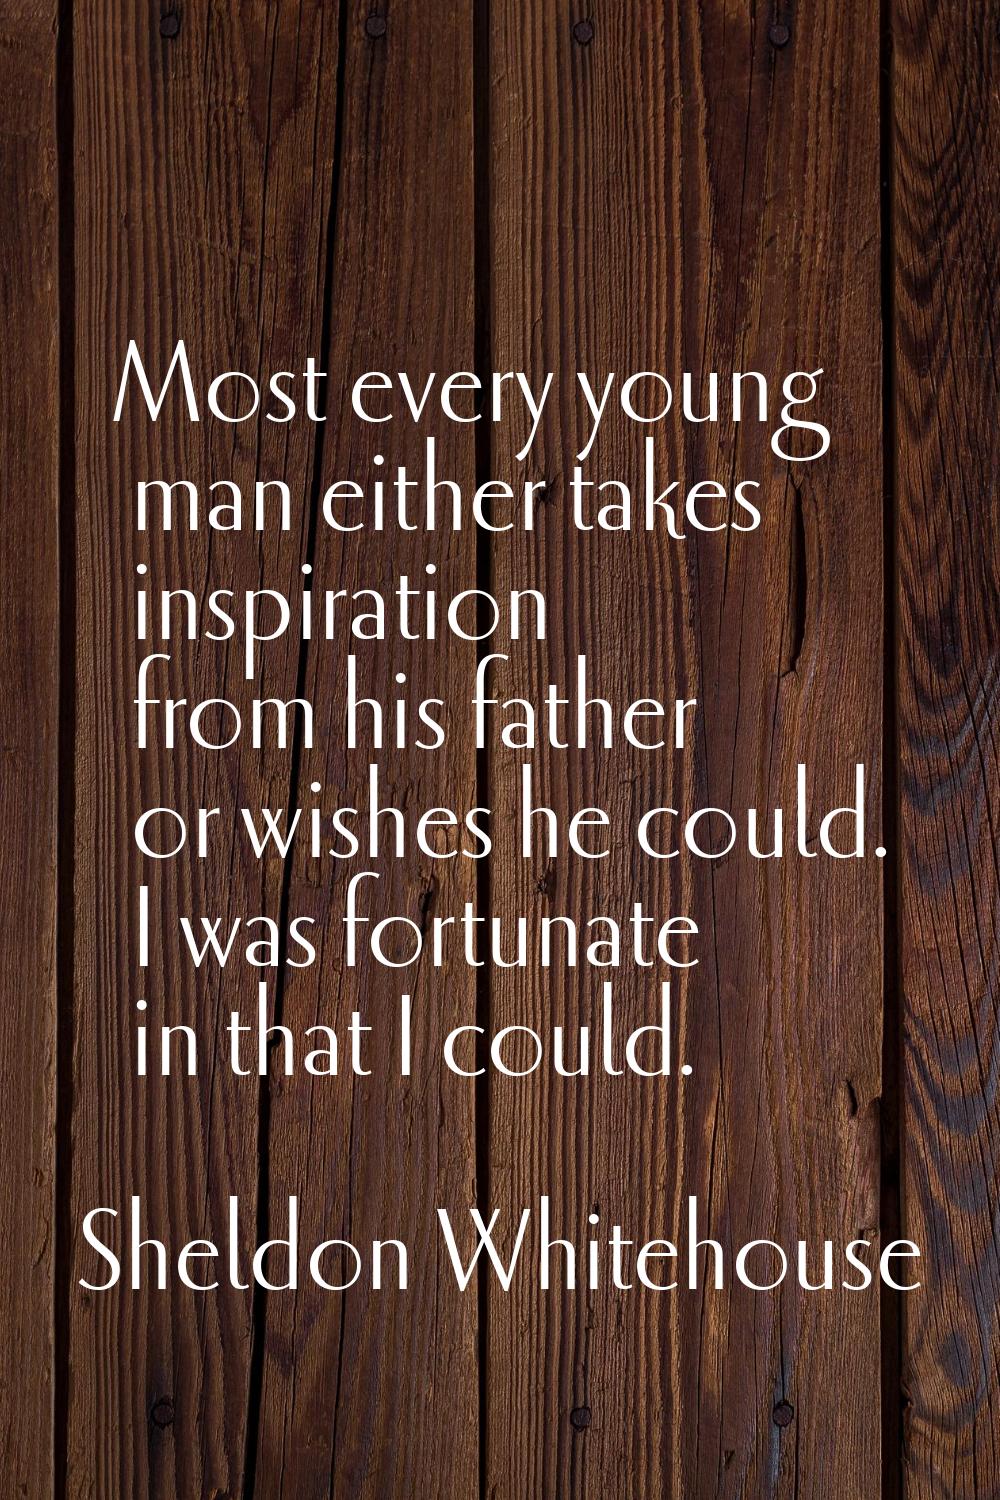 Most every young man either takes inspiration from his father or wishes he could. I was fortunate i